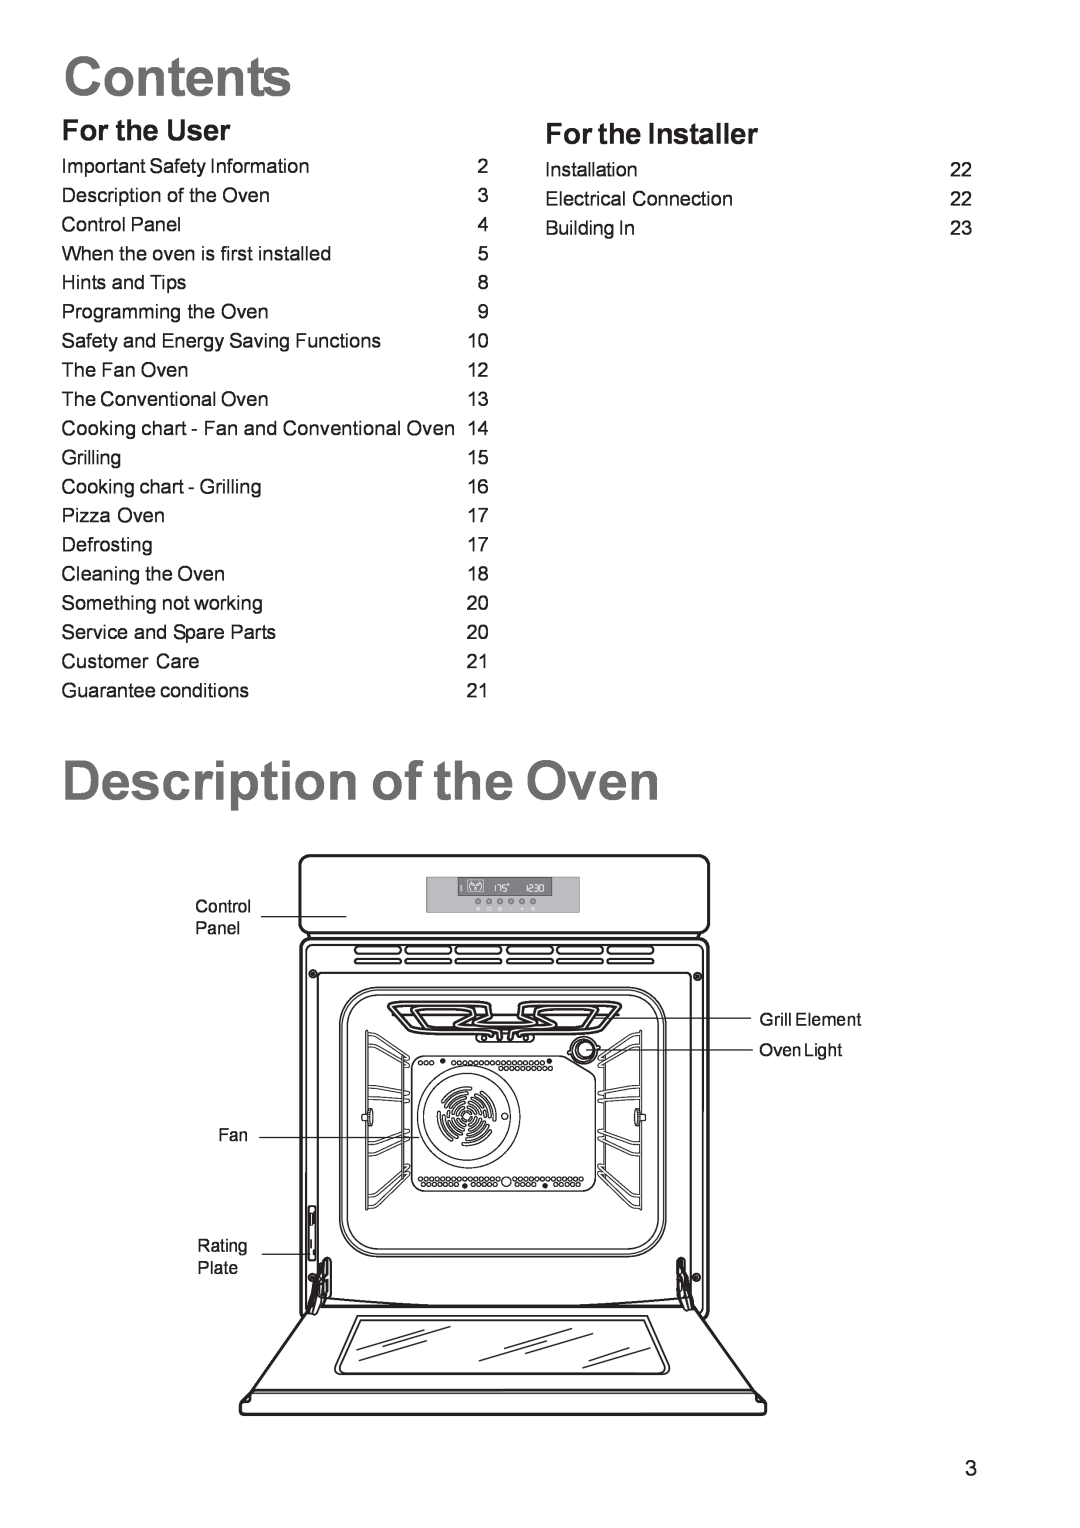 Zanussi ZBS 963 manual Contents, Description of the Oven, For the User, For the Installer 